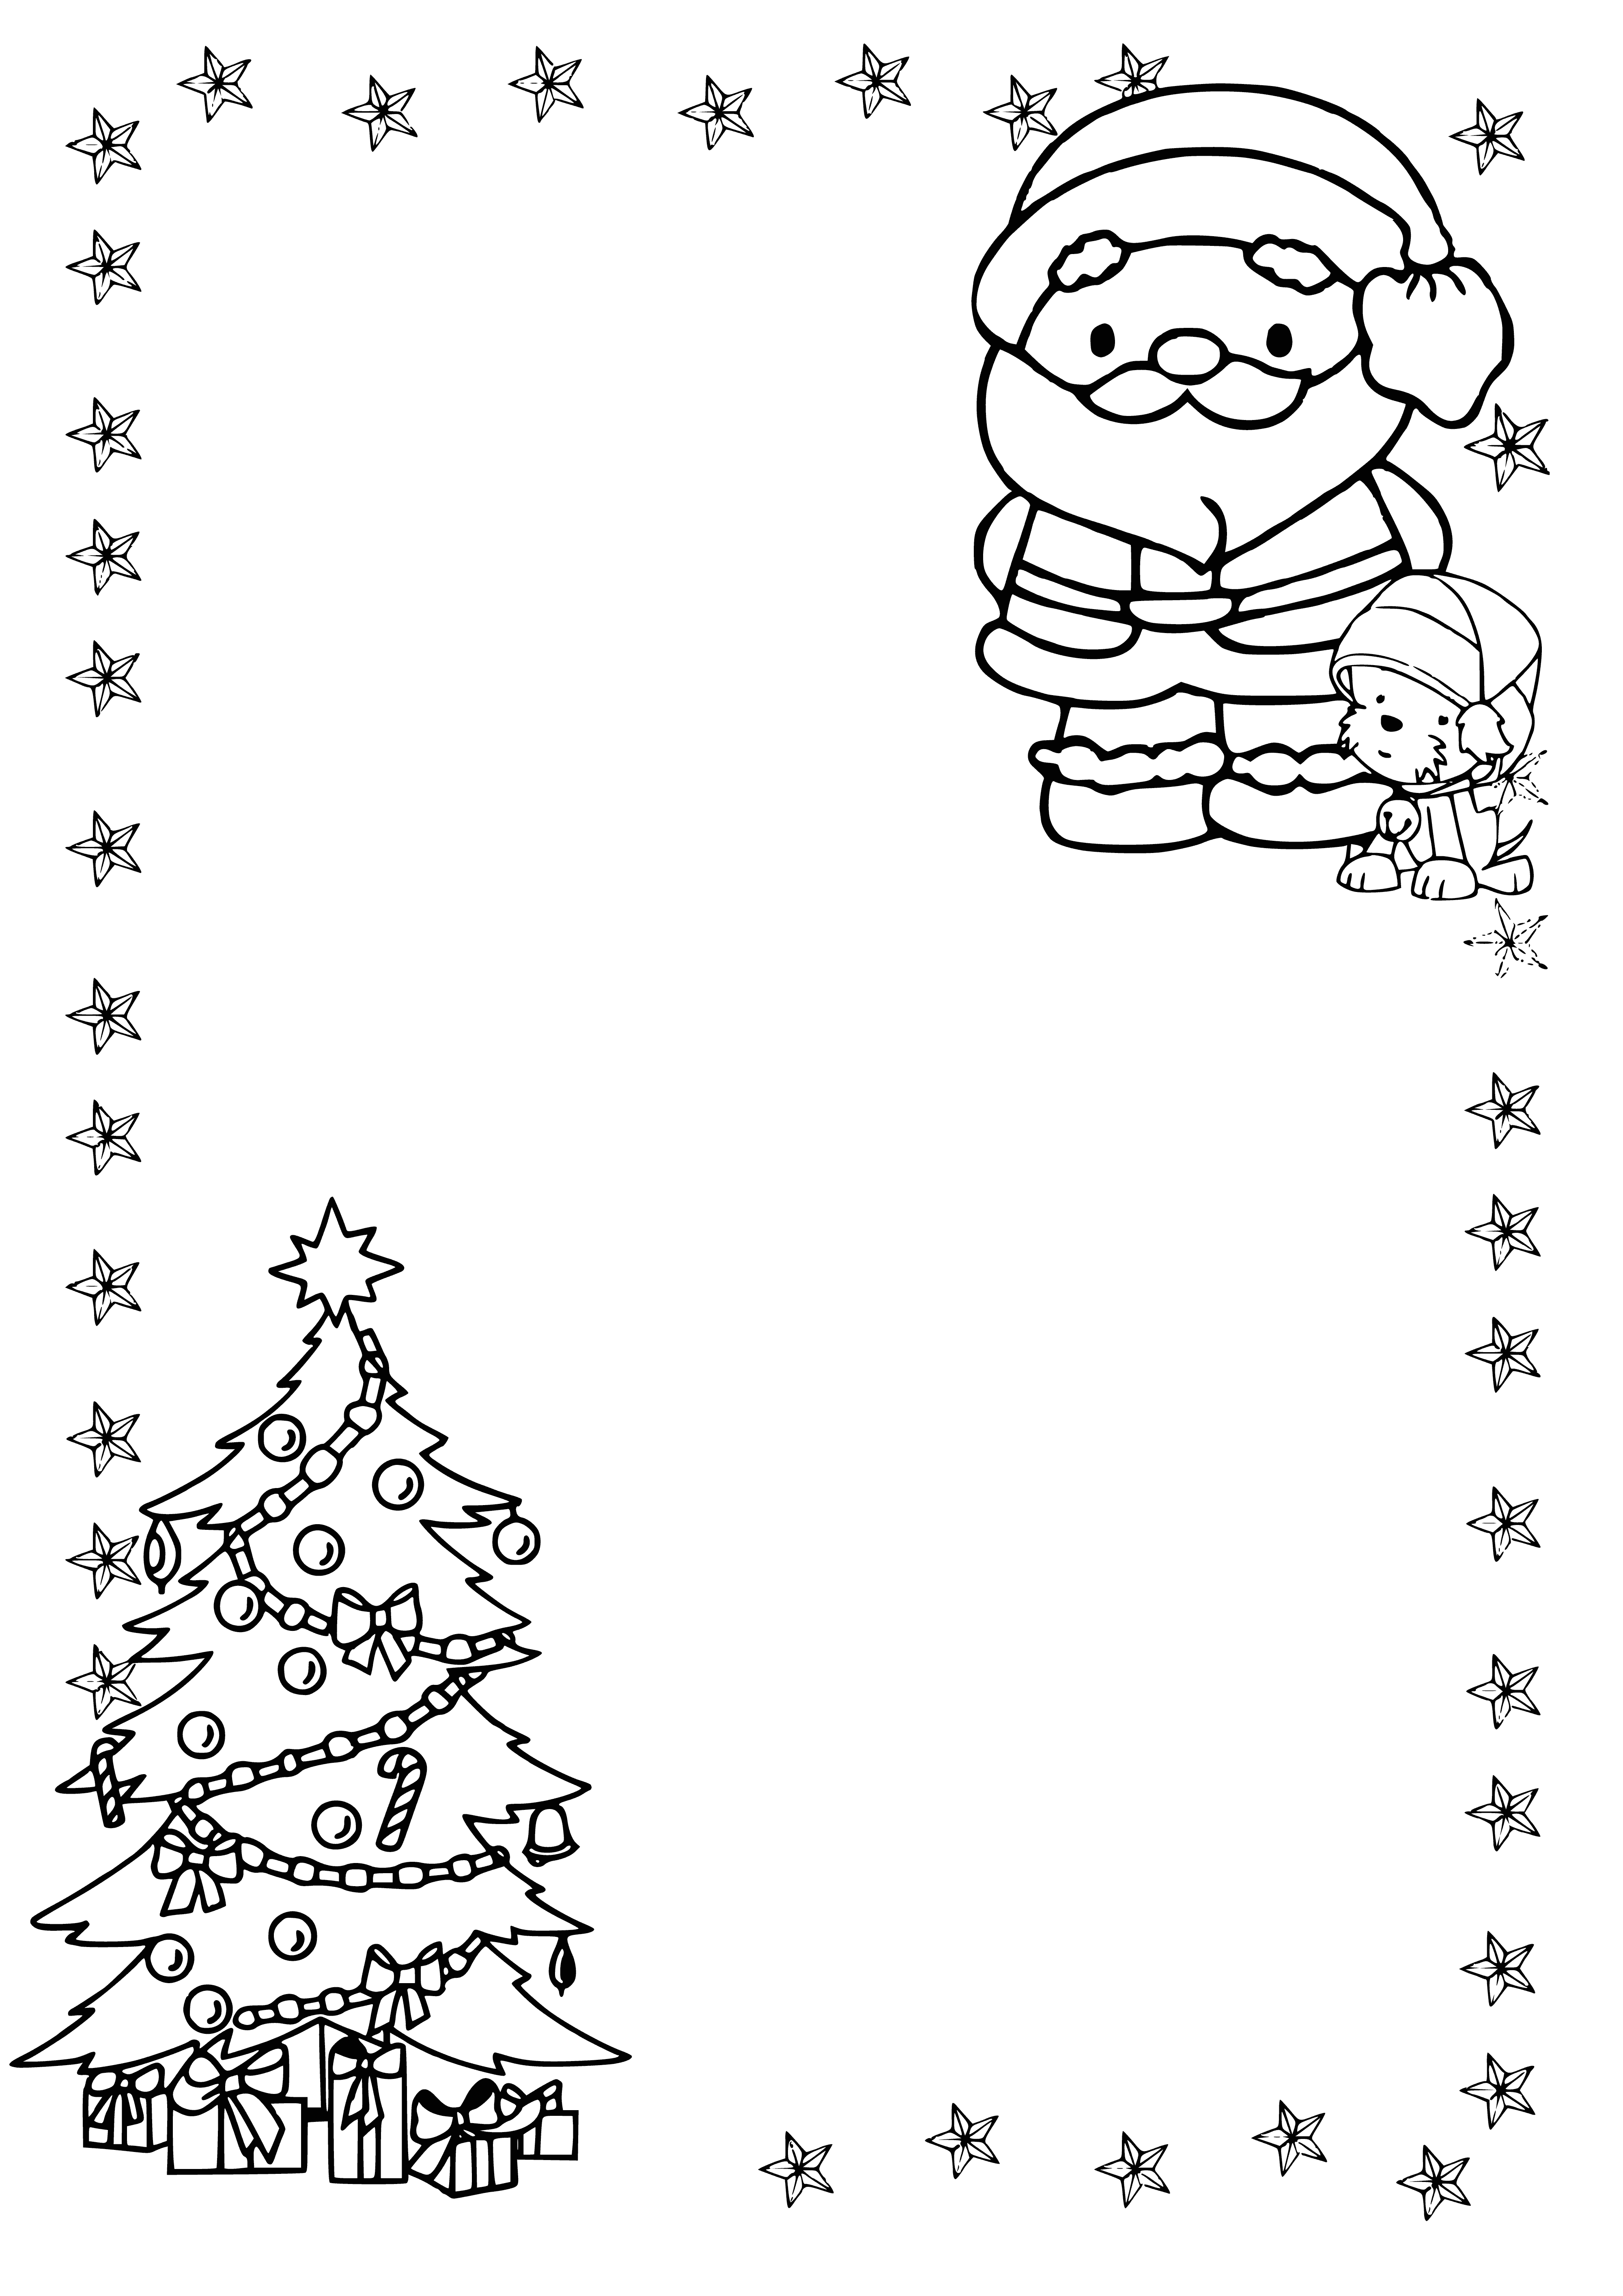 coloring page: Girl writing letter to Santa asking for a doll. "Dear Santa, I've been good. Please give me a doll for Christmas. Love, Lily."